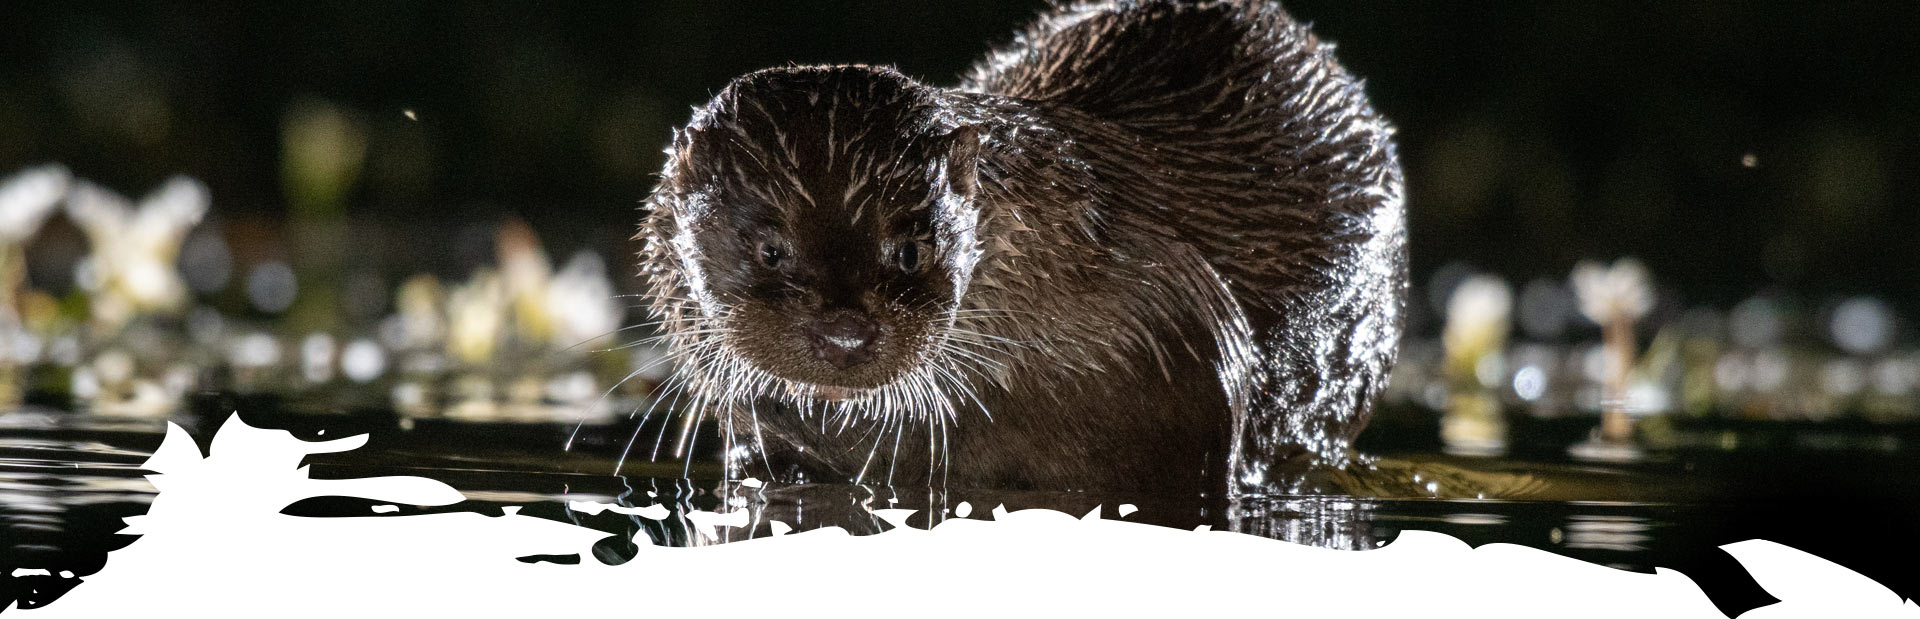 Otter at night on the edge of the water